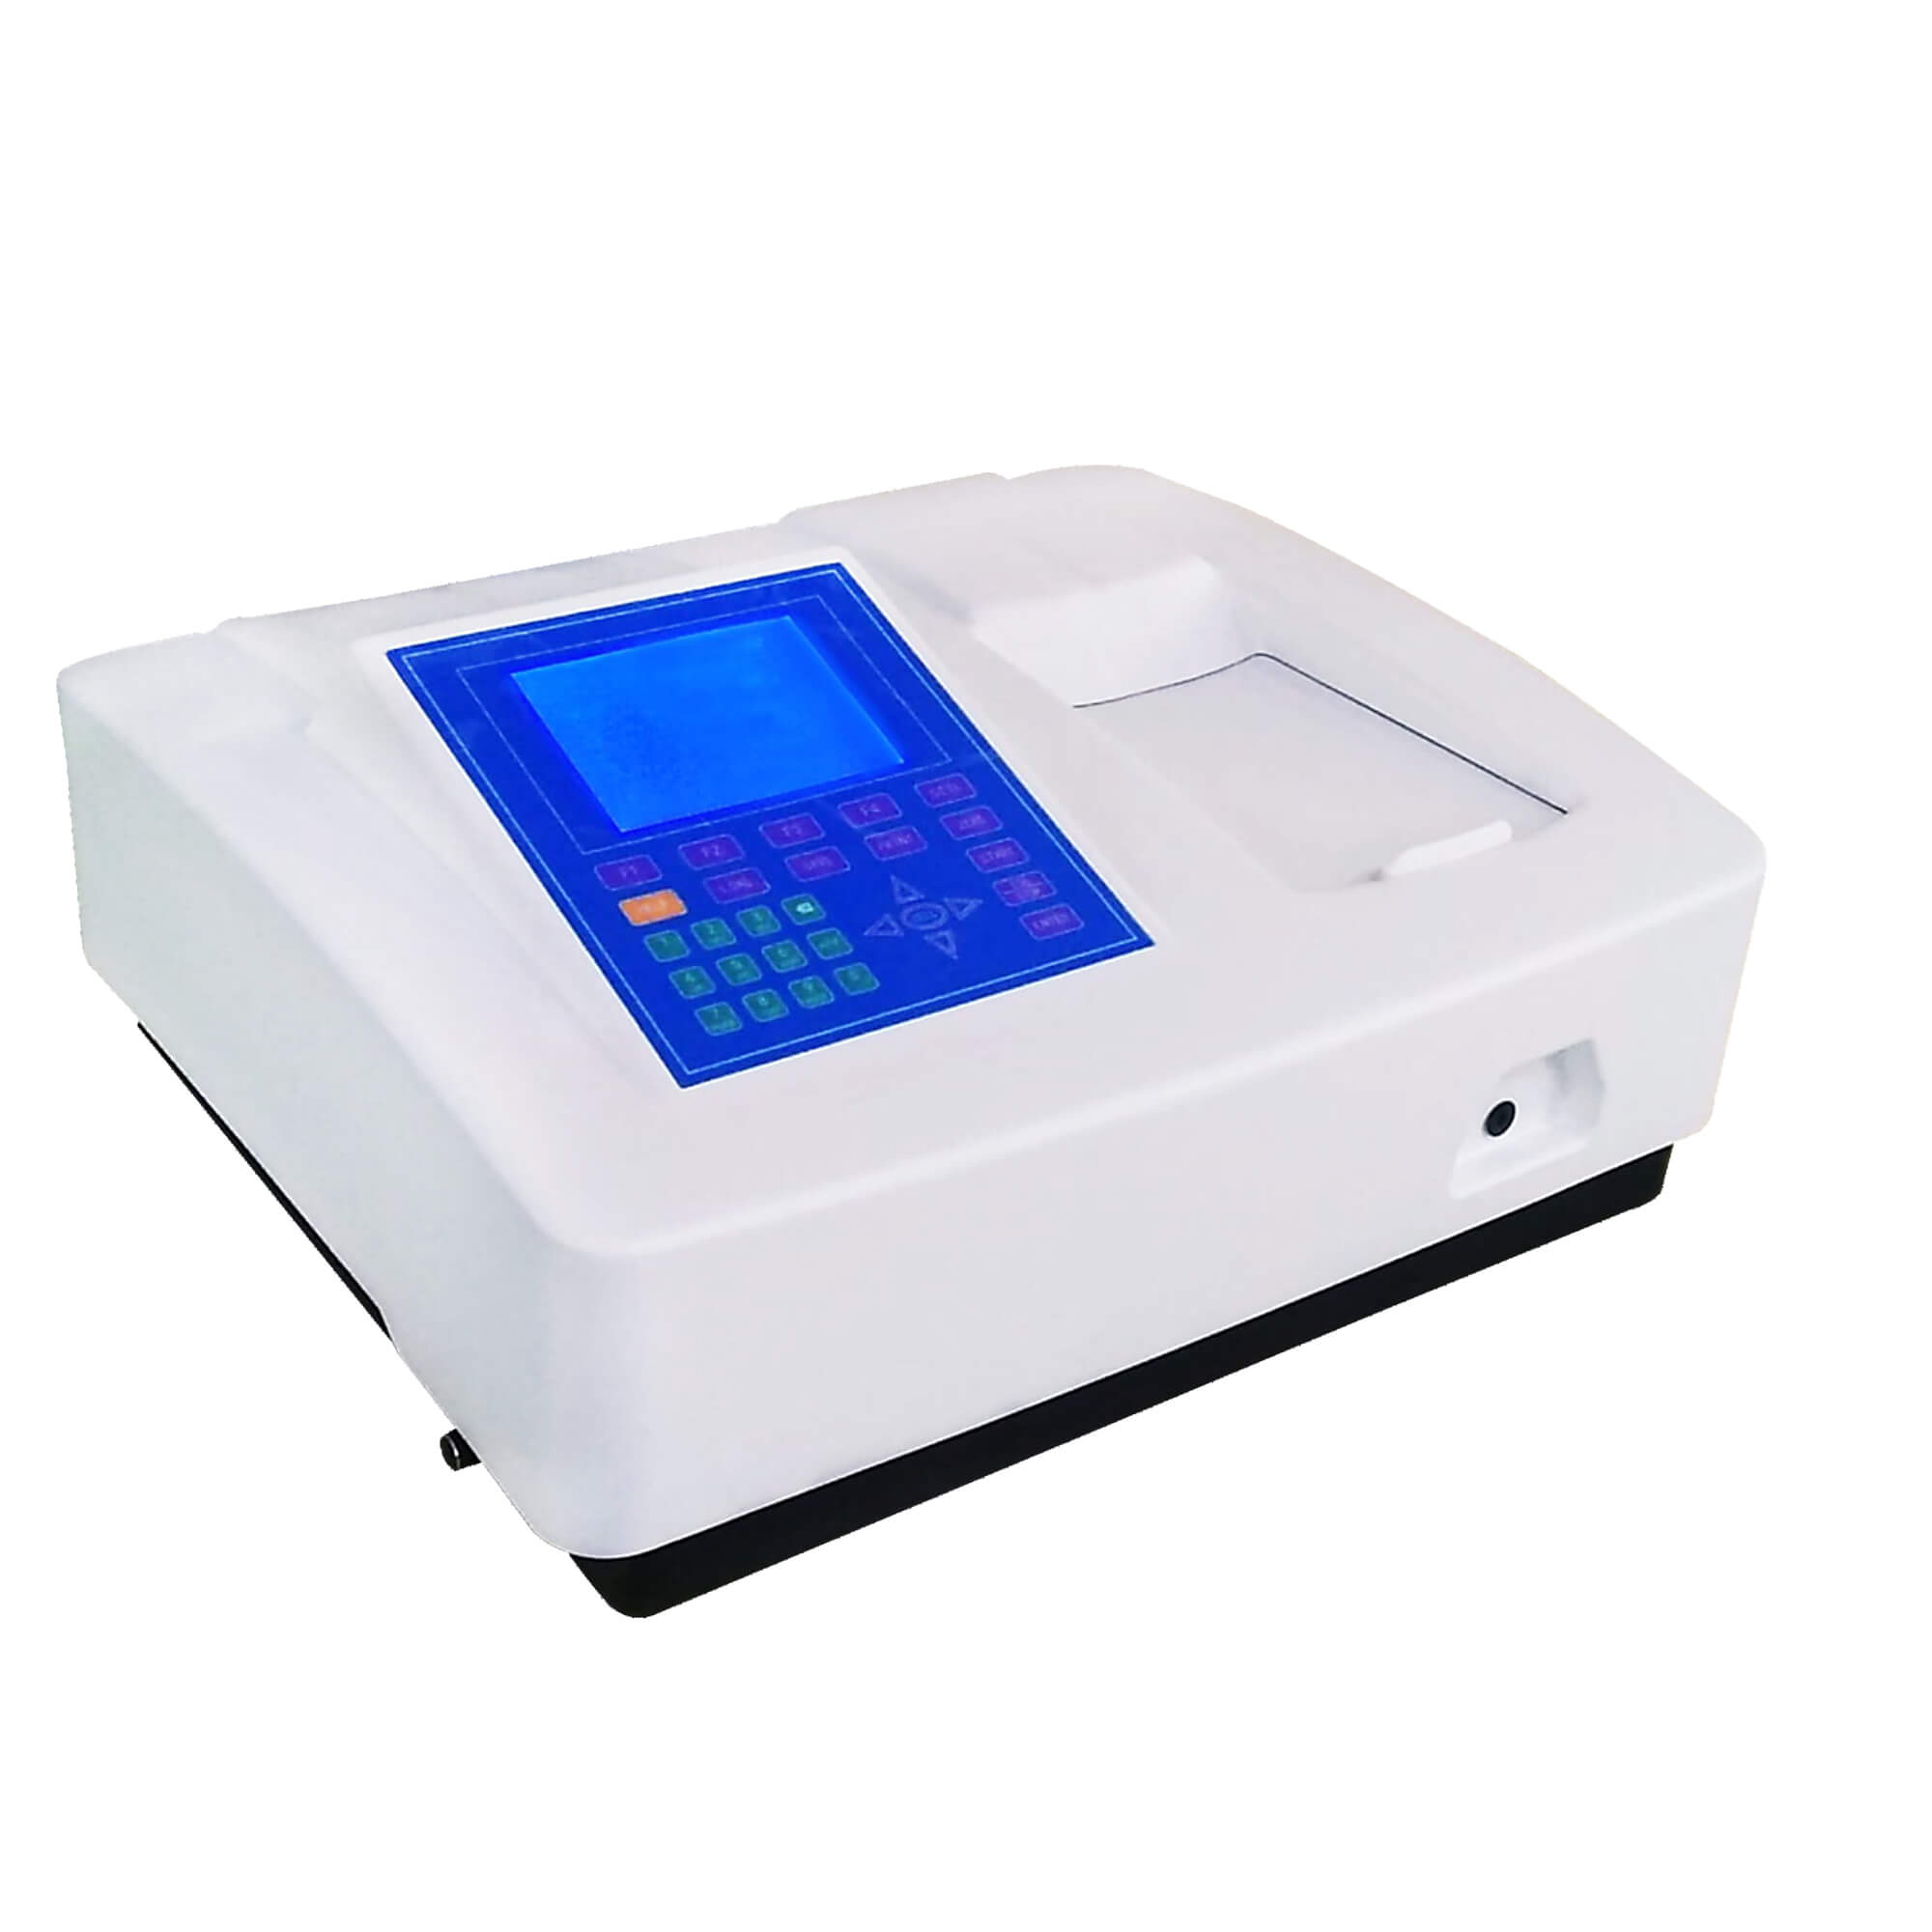 UV Visible Spectrophotometer (Double Beam) Manufacturer in India